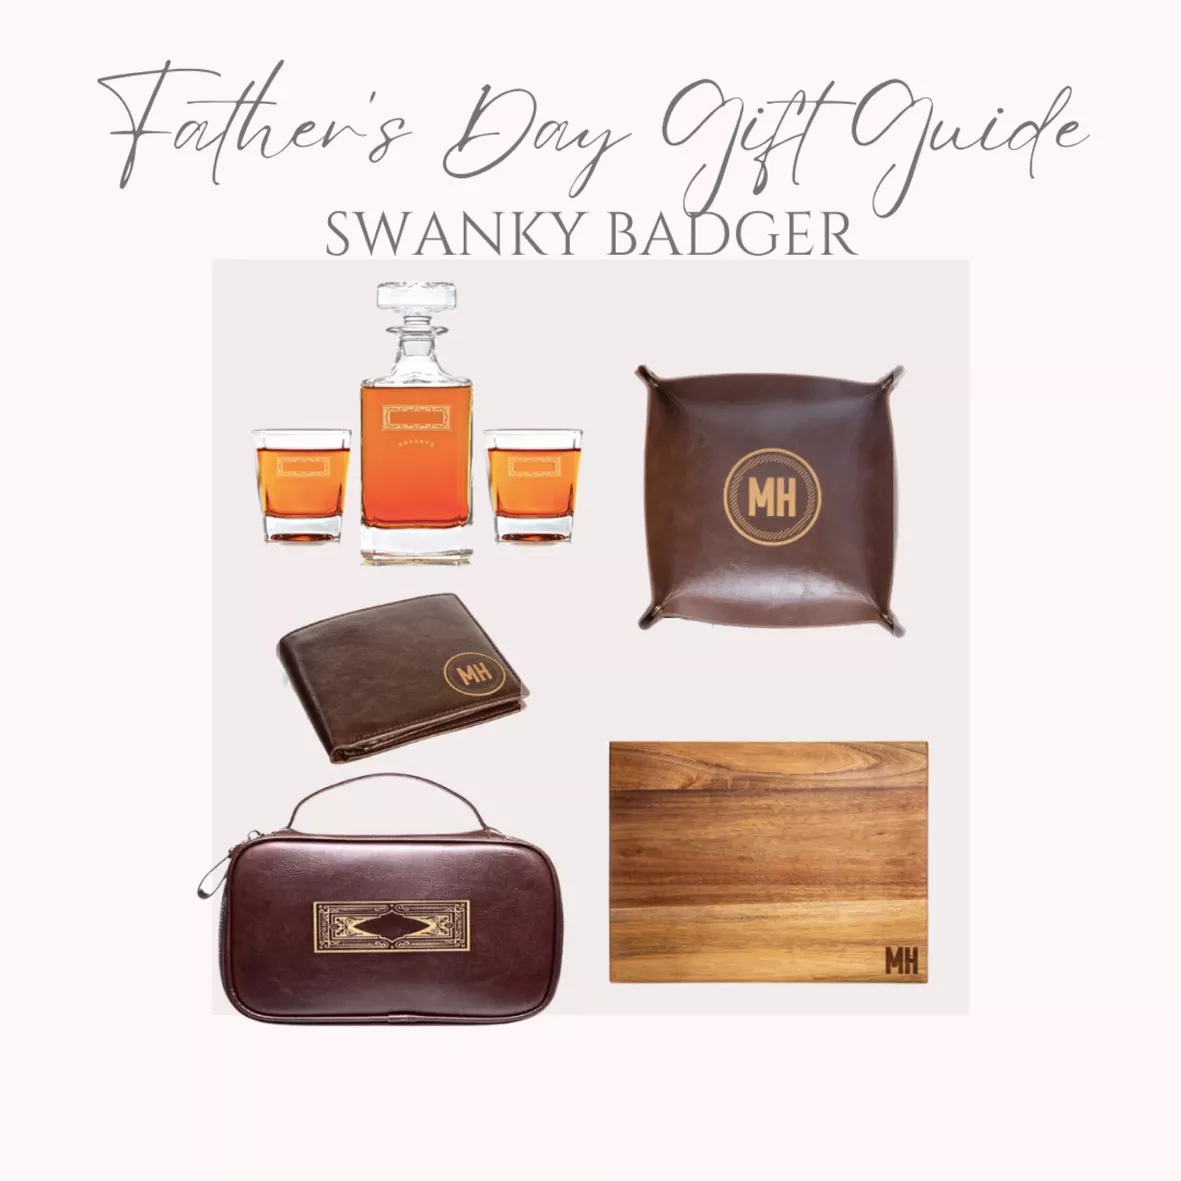 Which of these is your Favorite Gift?? - Swanky Badger